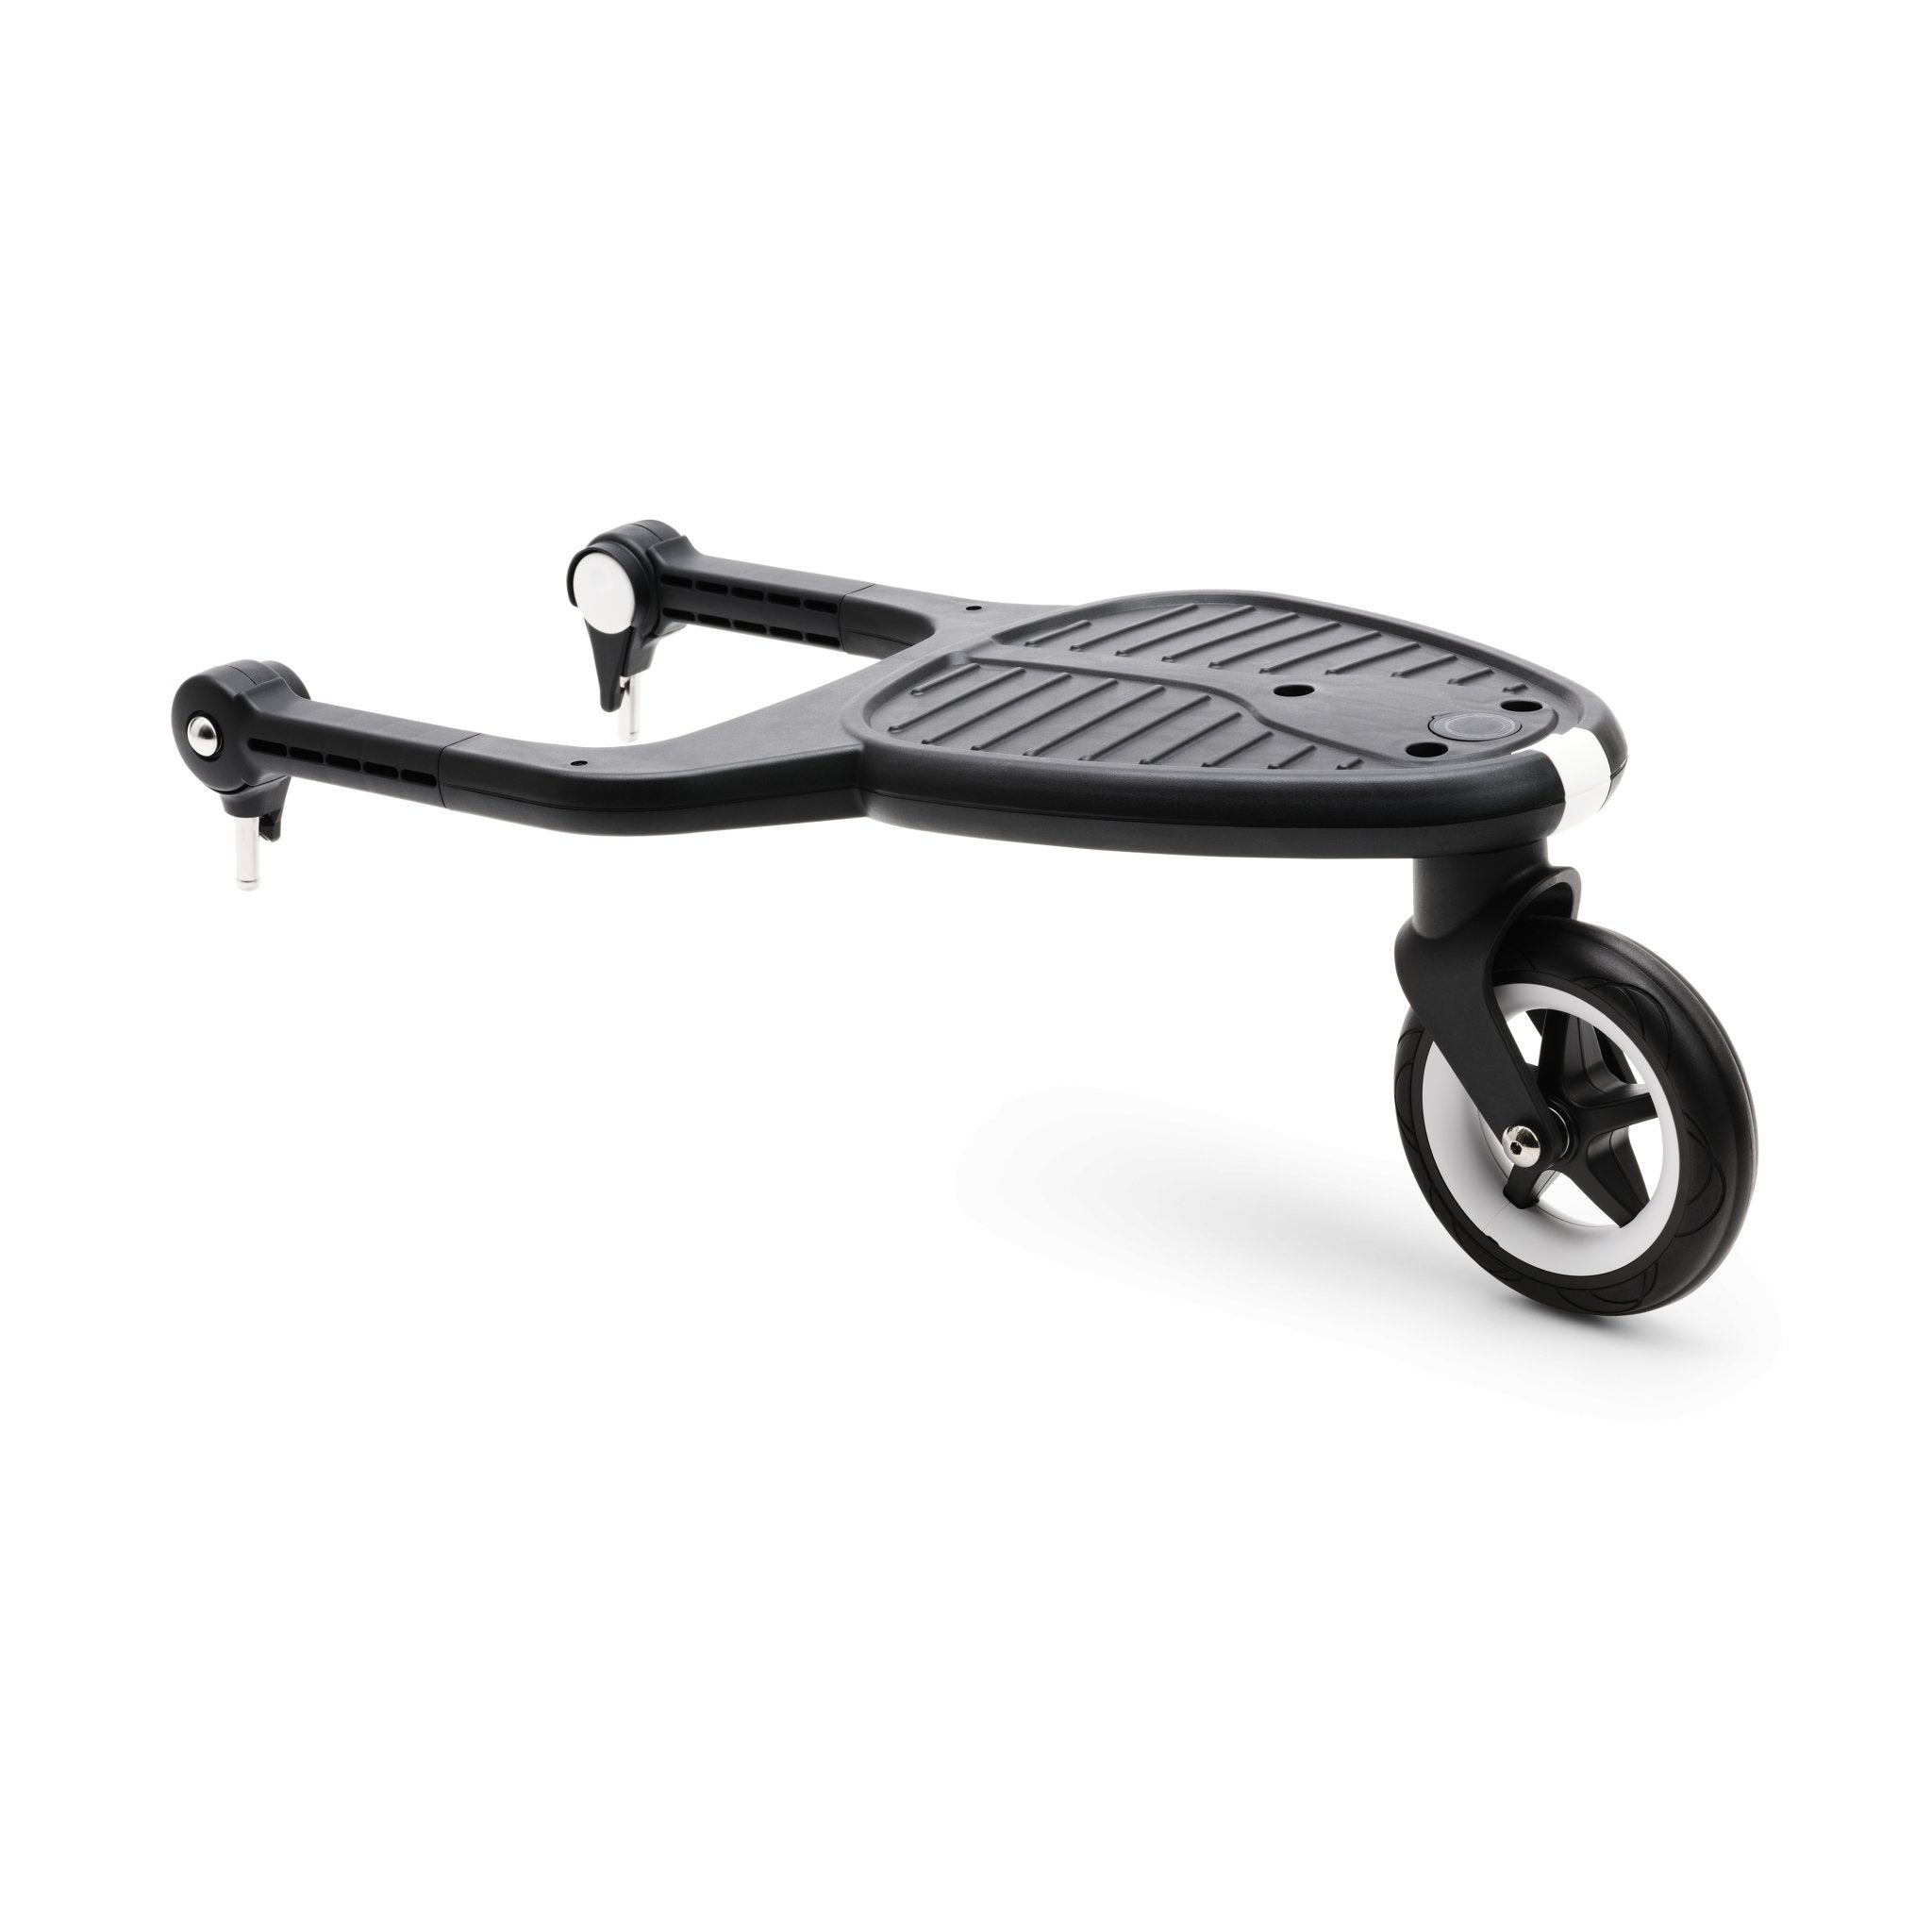 Bugaboo Butterfly Comfort Wheeled Board + - ANB Baby -8717447575139$100 - $300